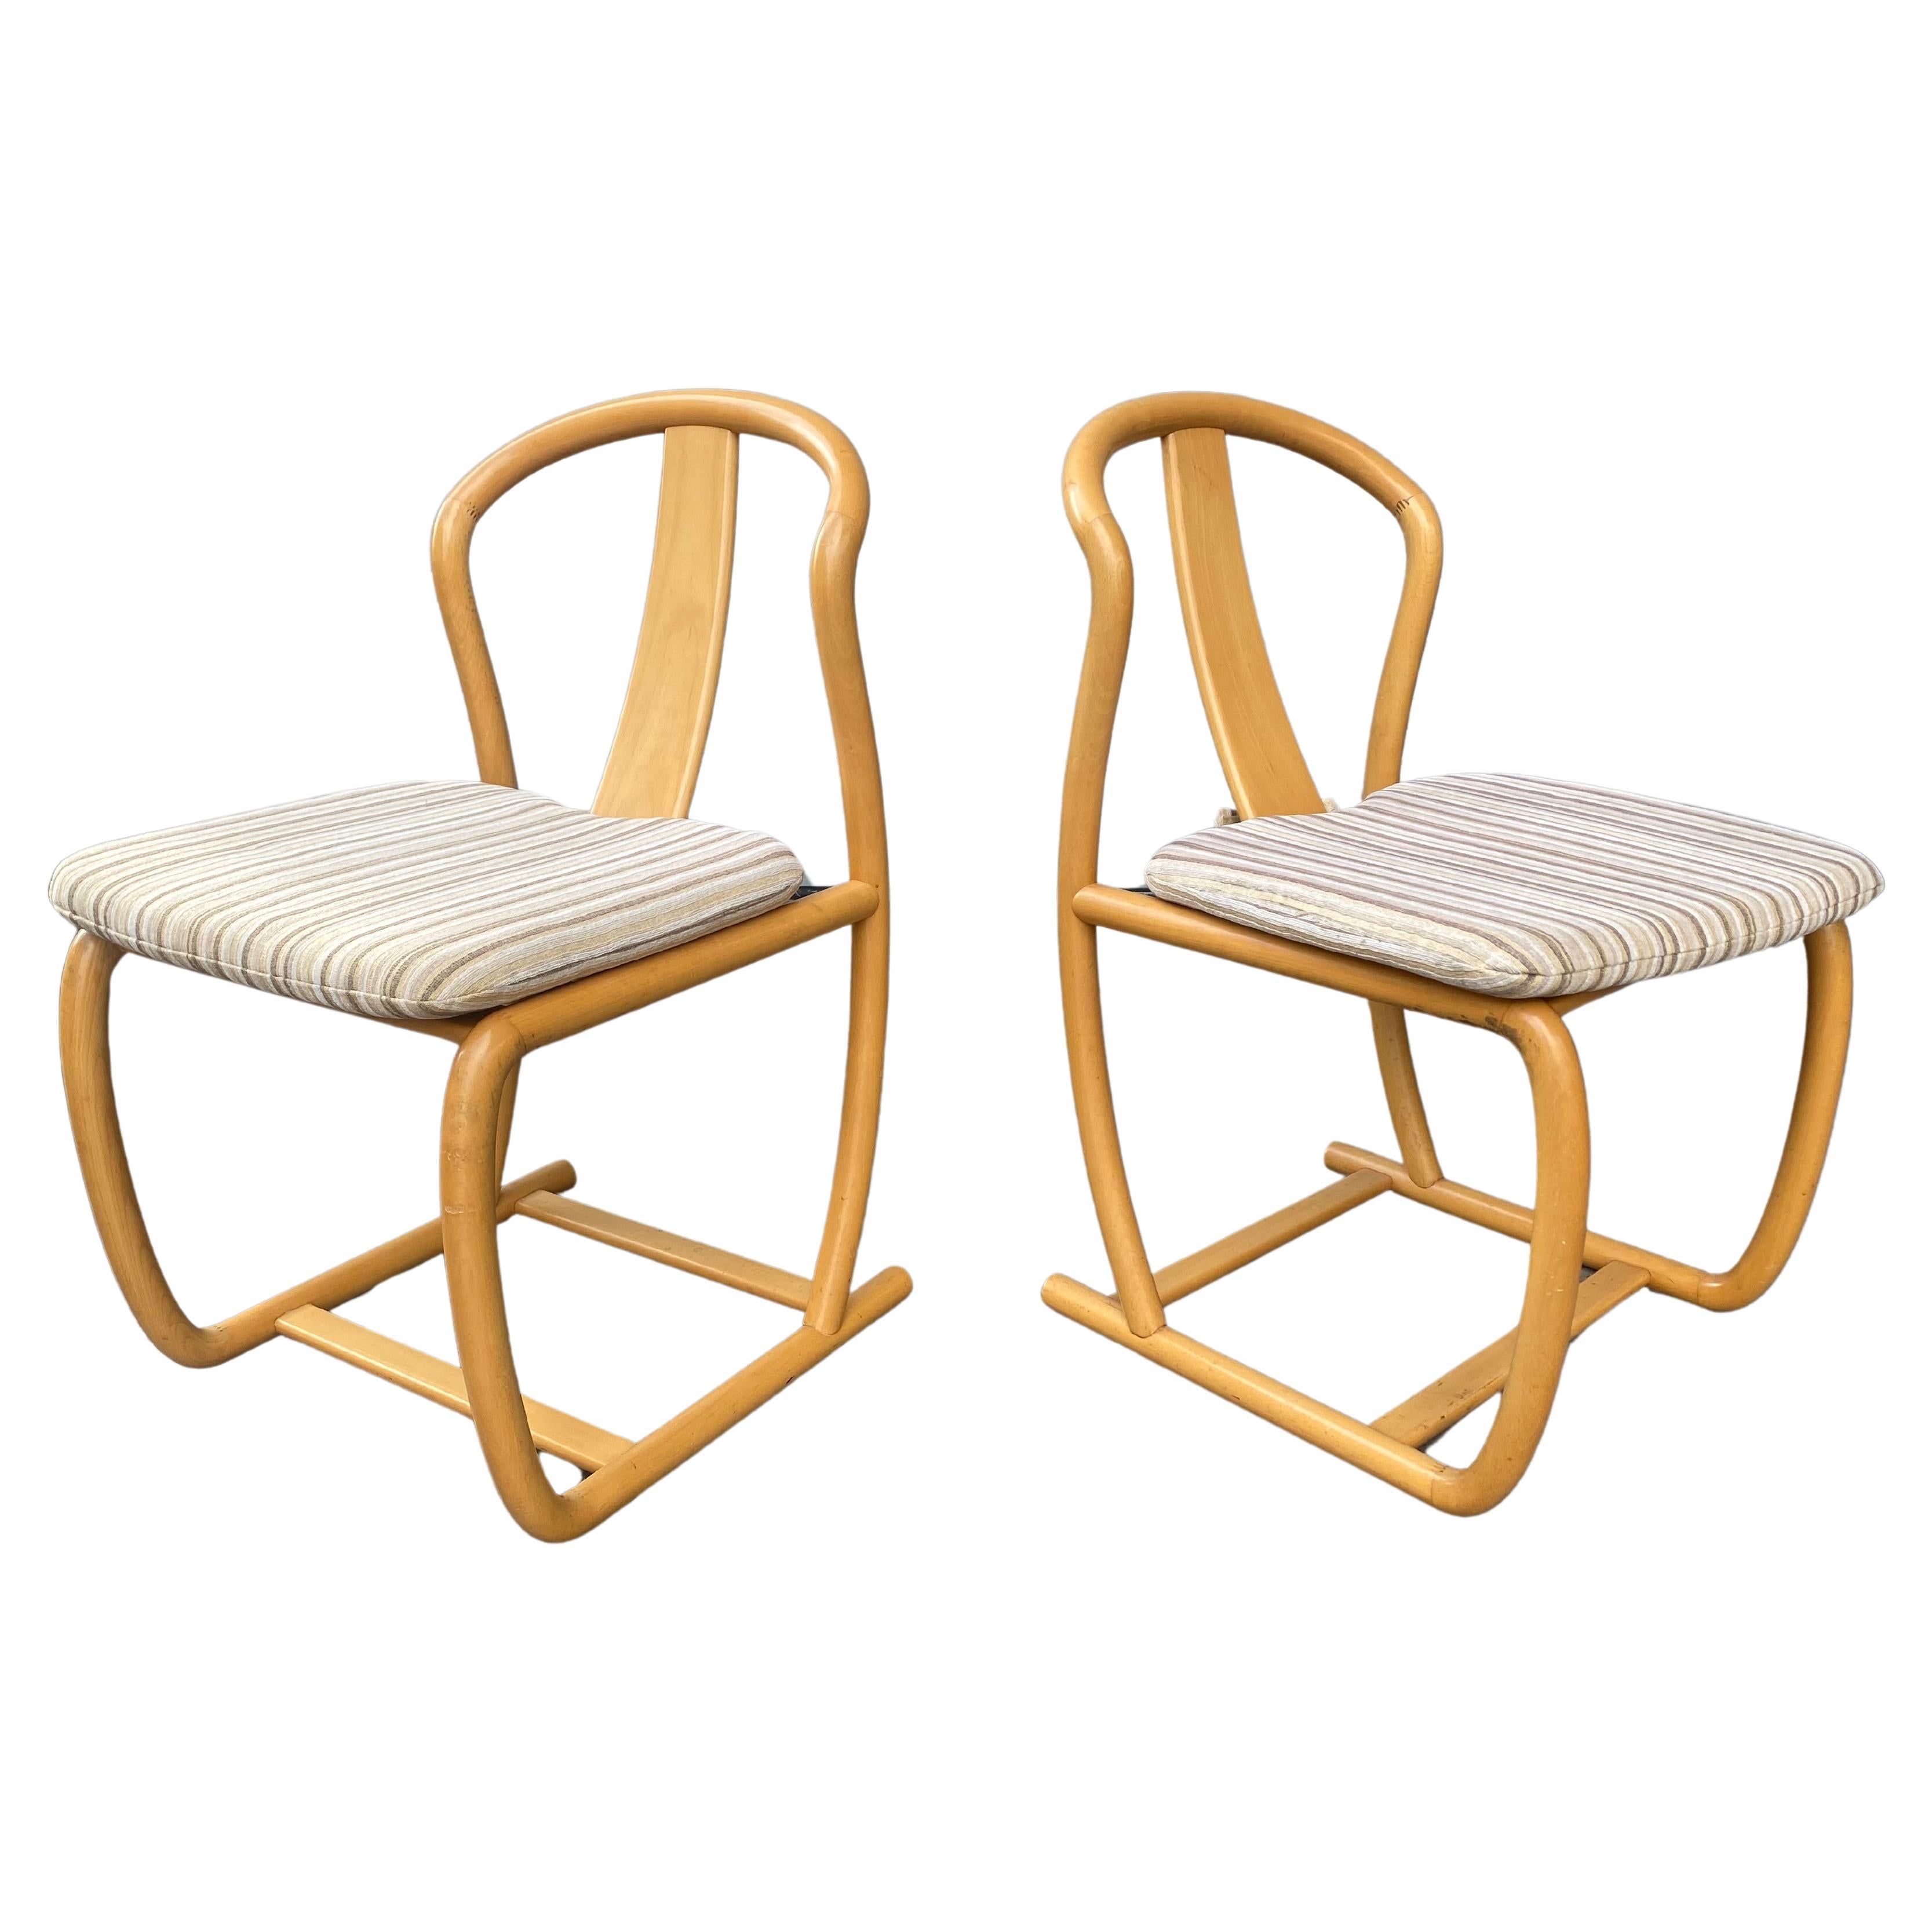 Set of Four Modern Dining Chairs in beech wood by Tecnosedia , Italy, 1980s For Sale